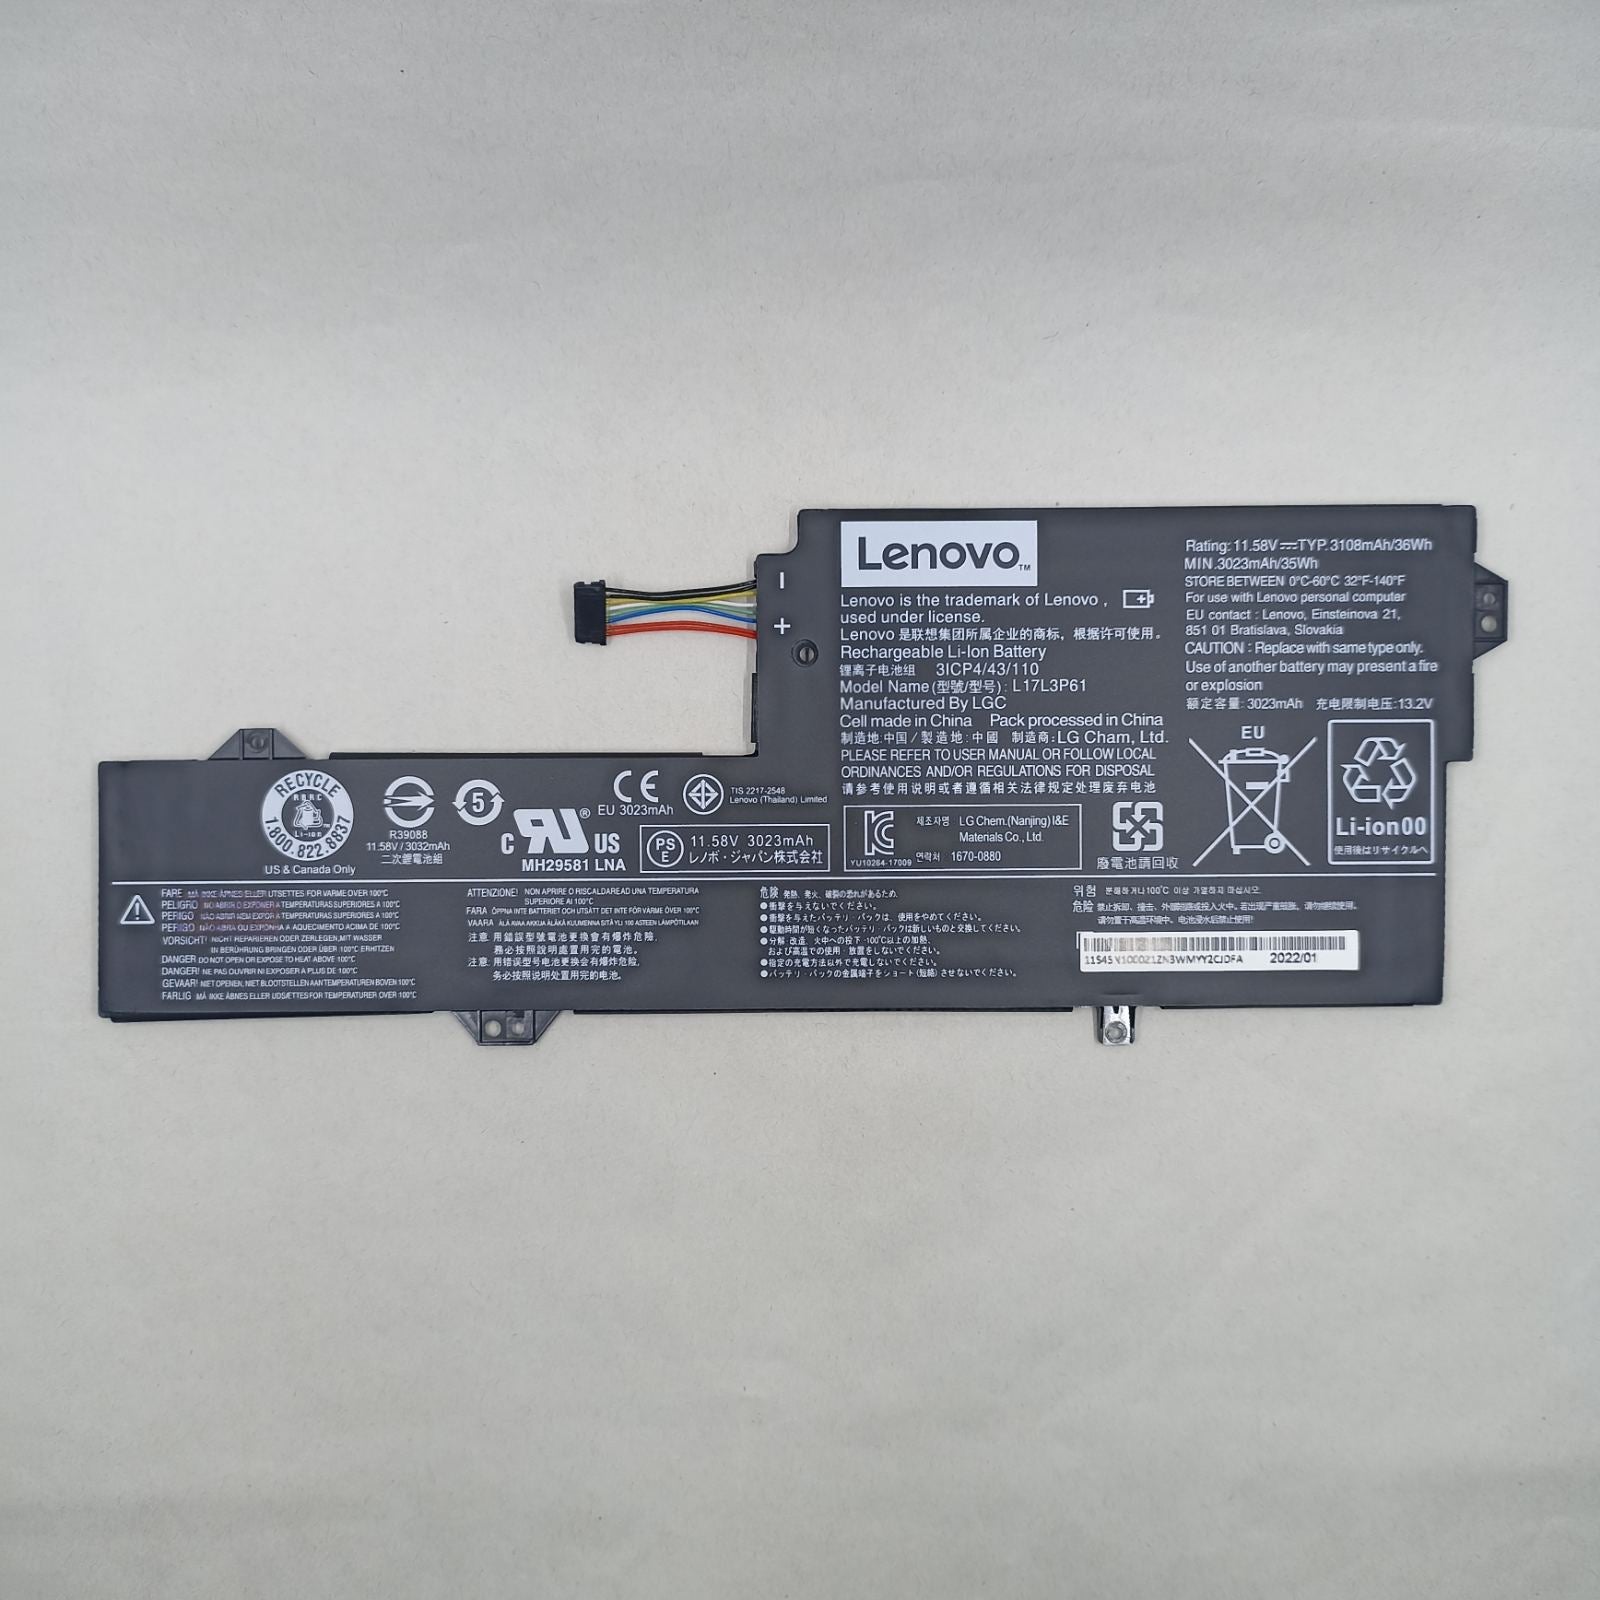 Replacement Battery for Lenovo 320S-13IKB A1